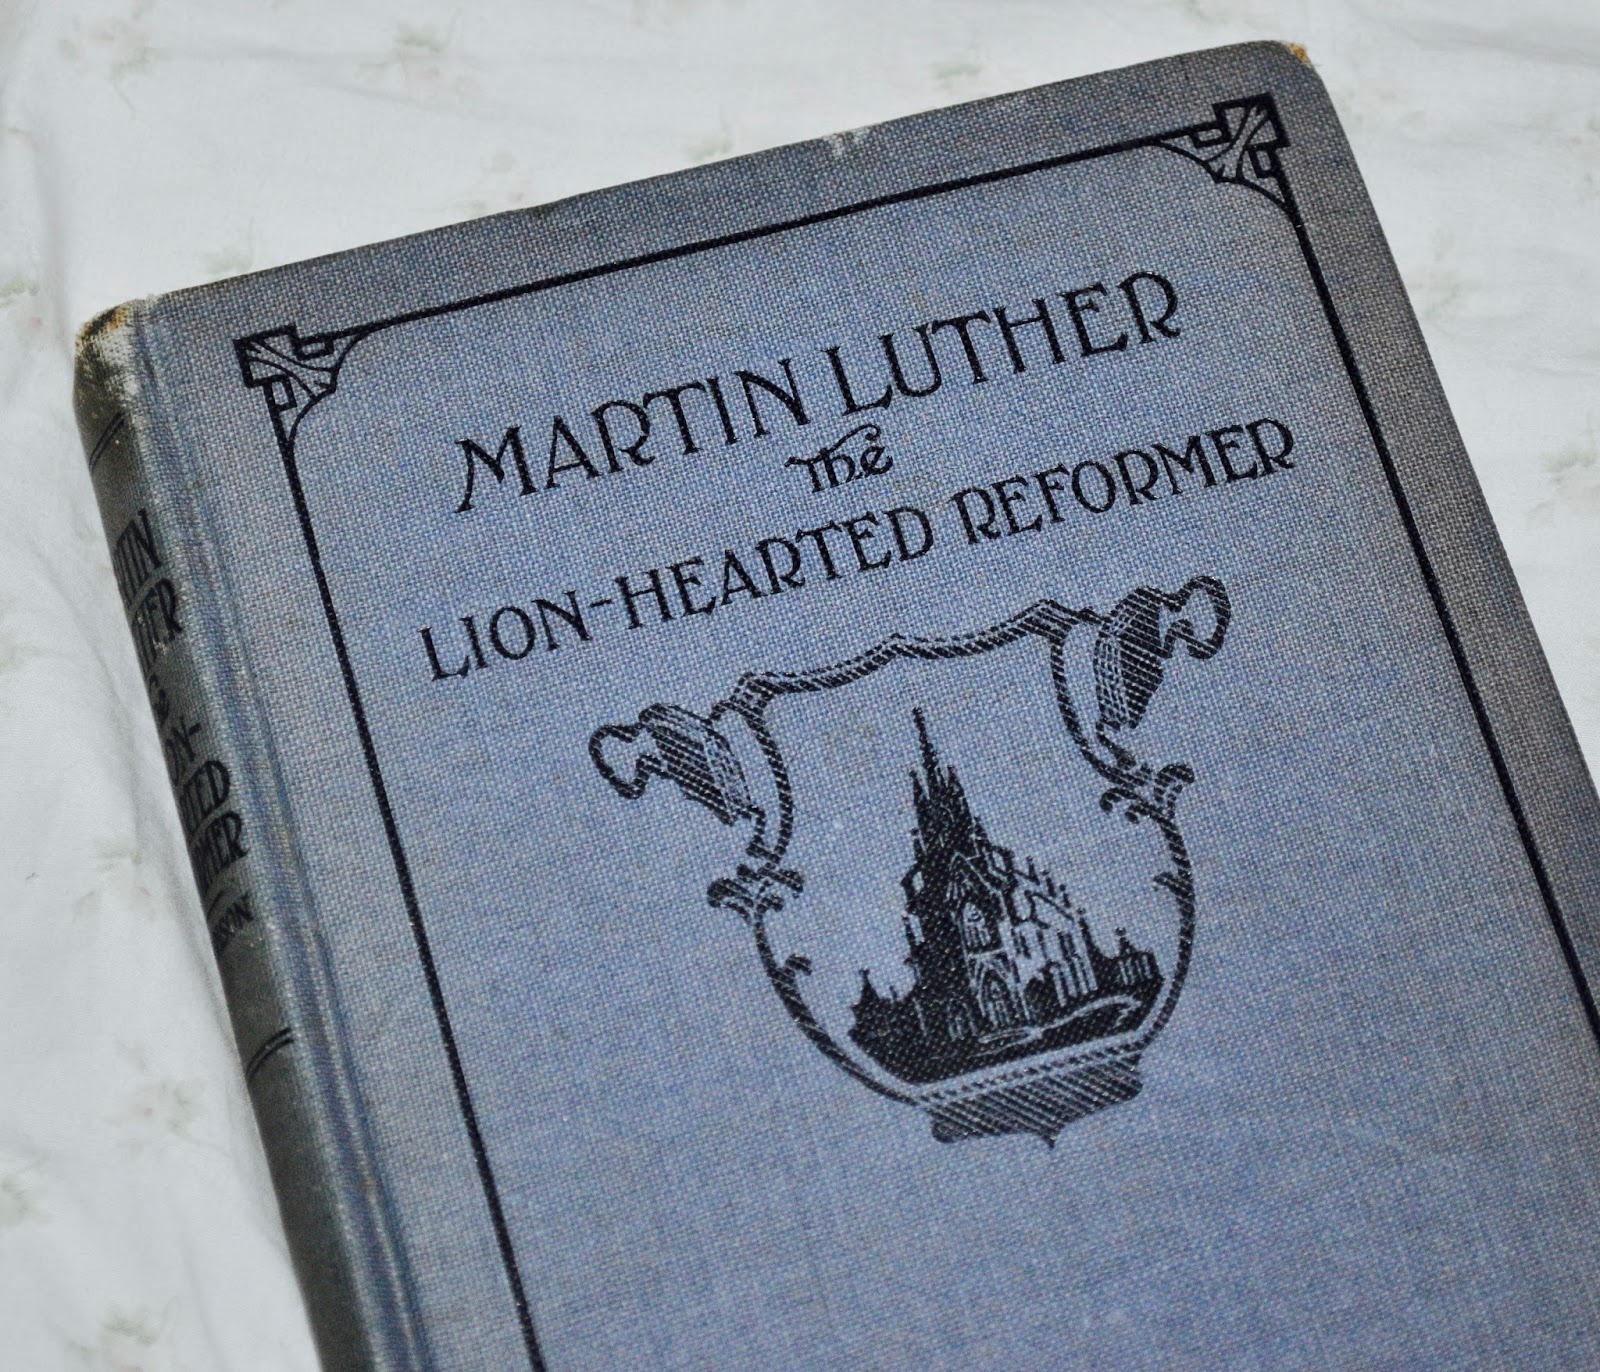 Martin Luther The Lion Hearted Reformer by J A Morrison This 1924 edition is dedicated "To the Youth of the Land " I found this at Helping Hands thrift